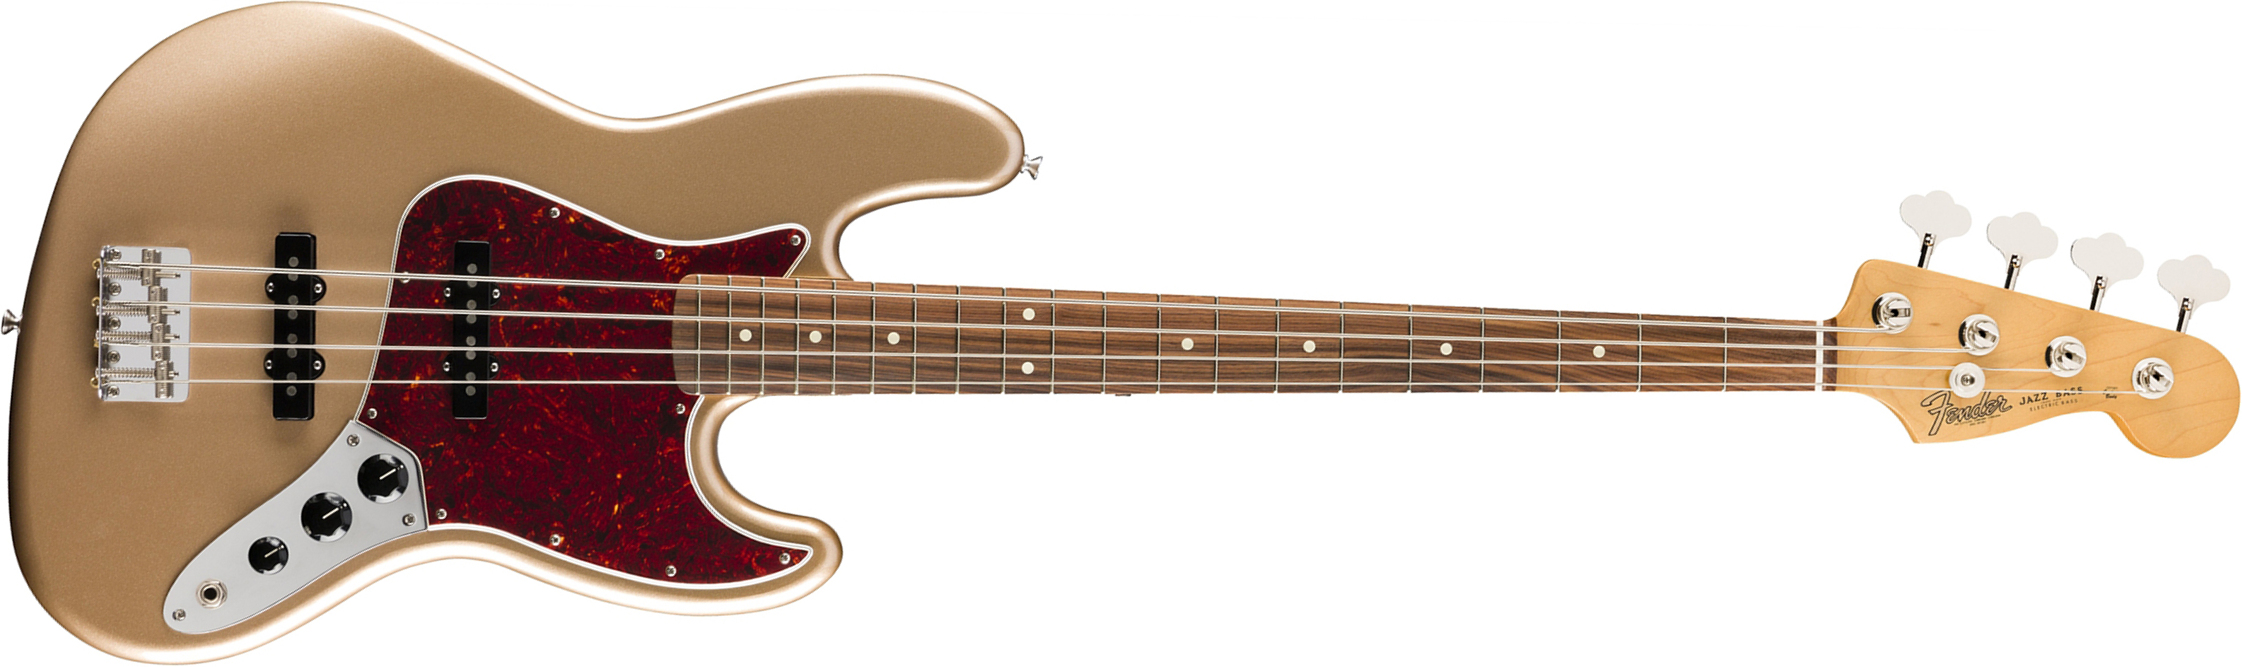 Fender Jazz Bass 60s Vintera Vintage Mex Pf - Firemist Gold - Solid body electric bass - Main picture